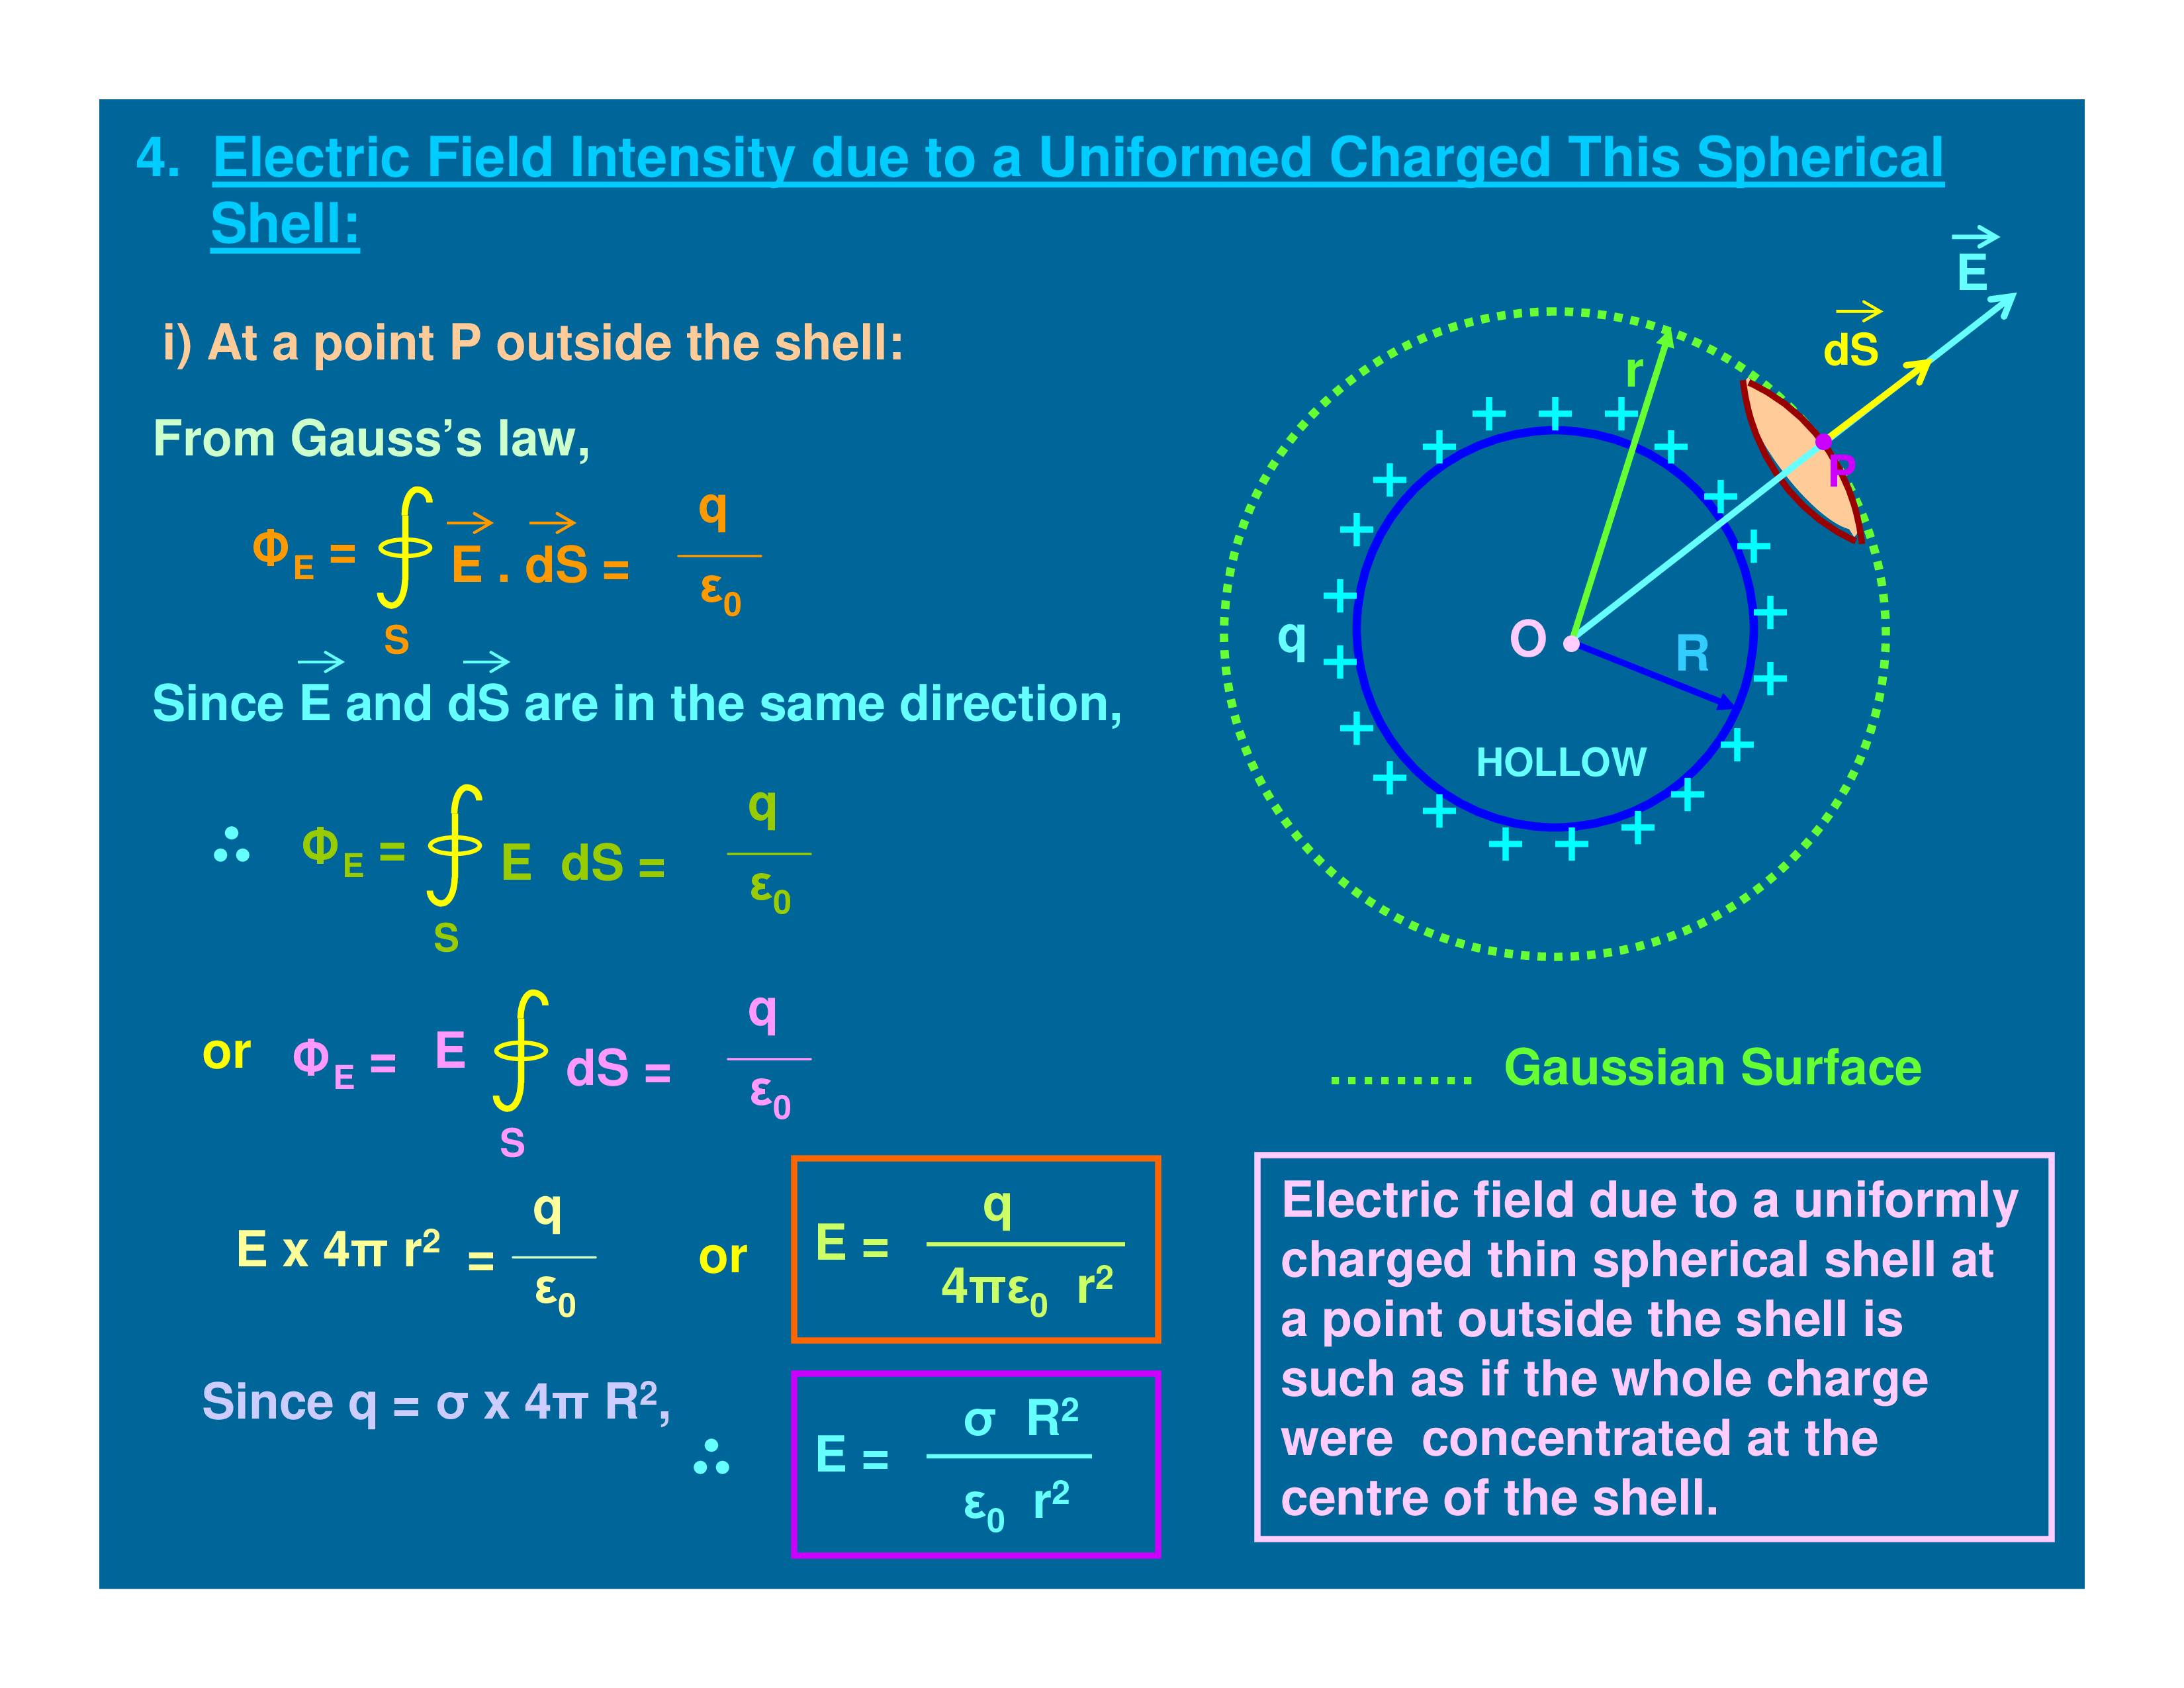 Electric Field Intensity at various points due to a uniformly charged